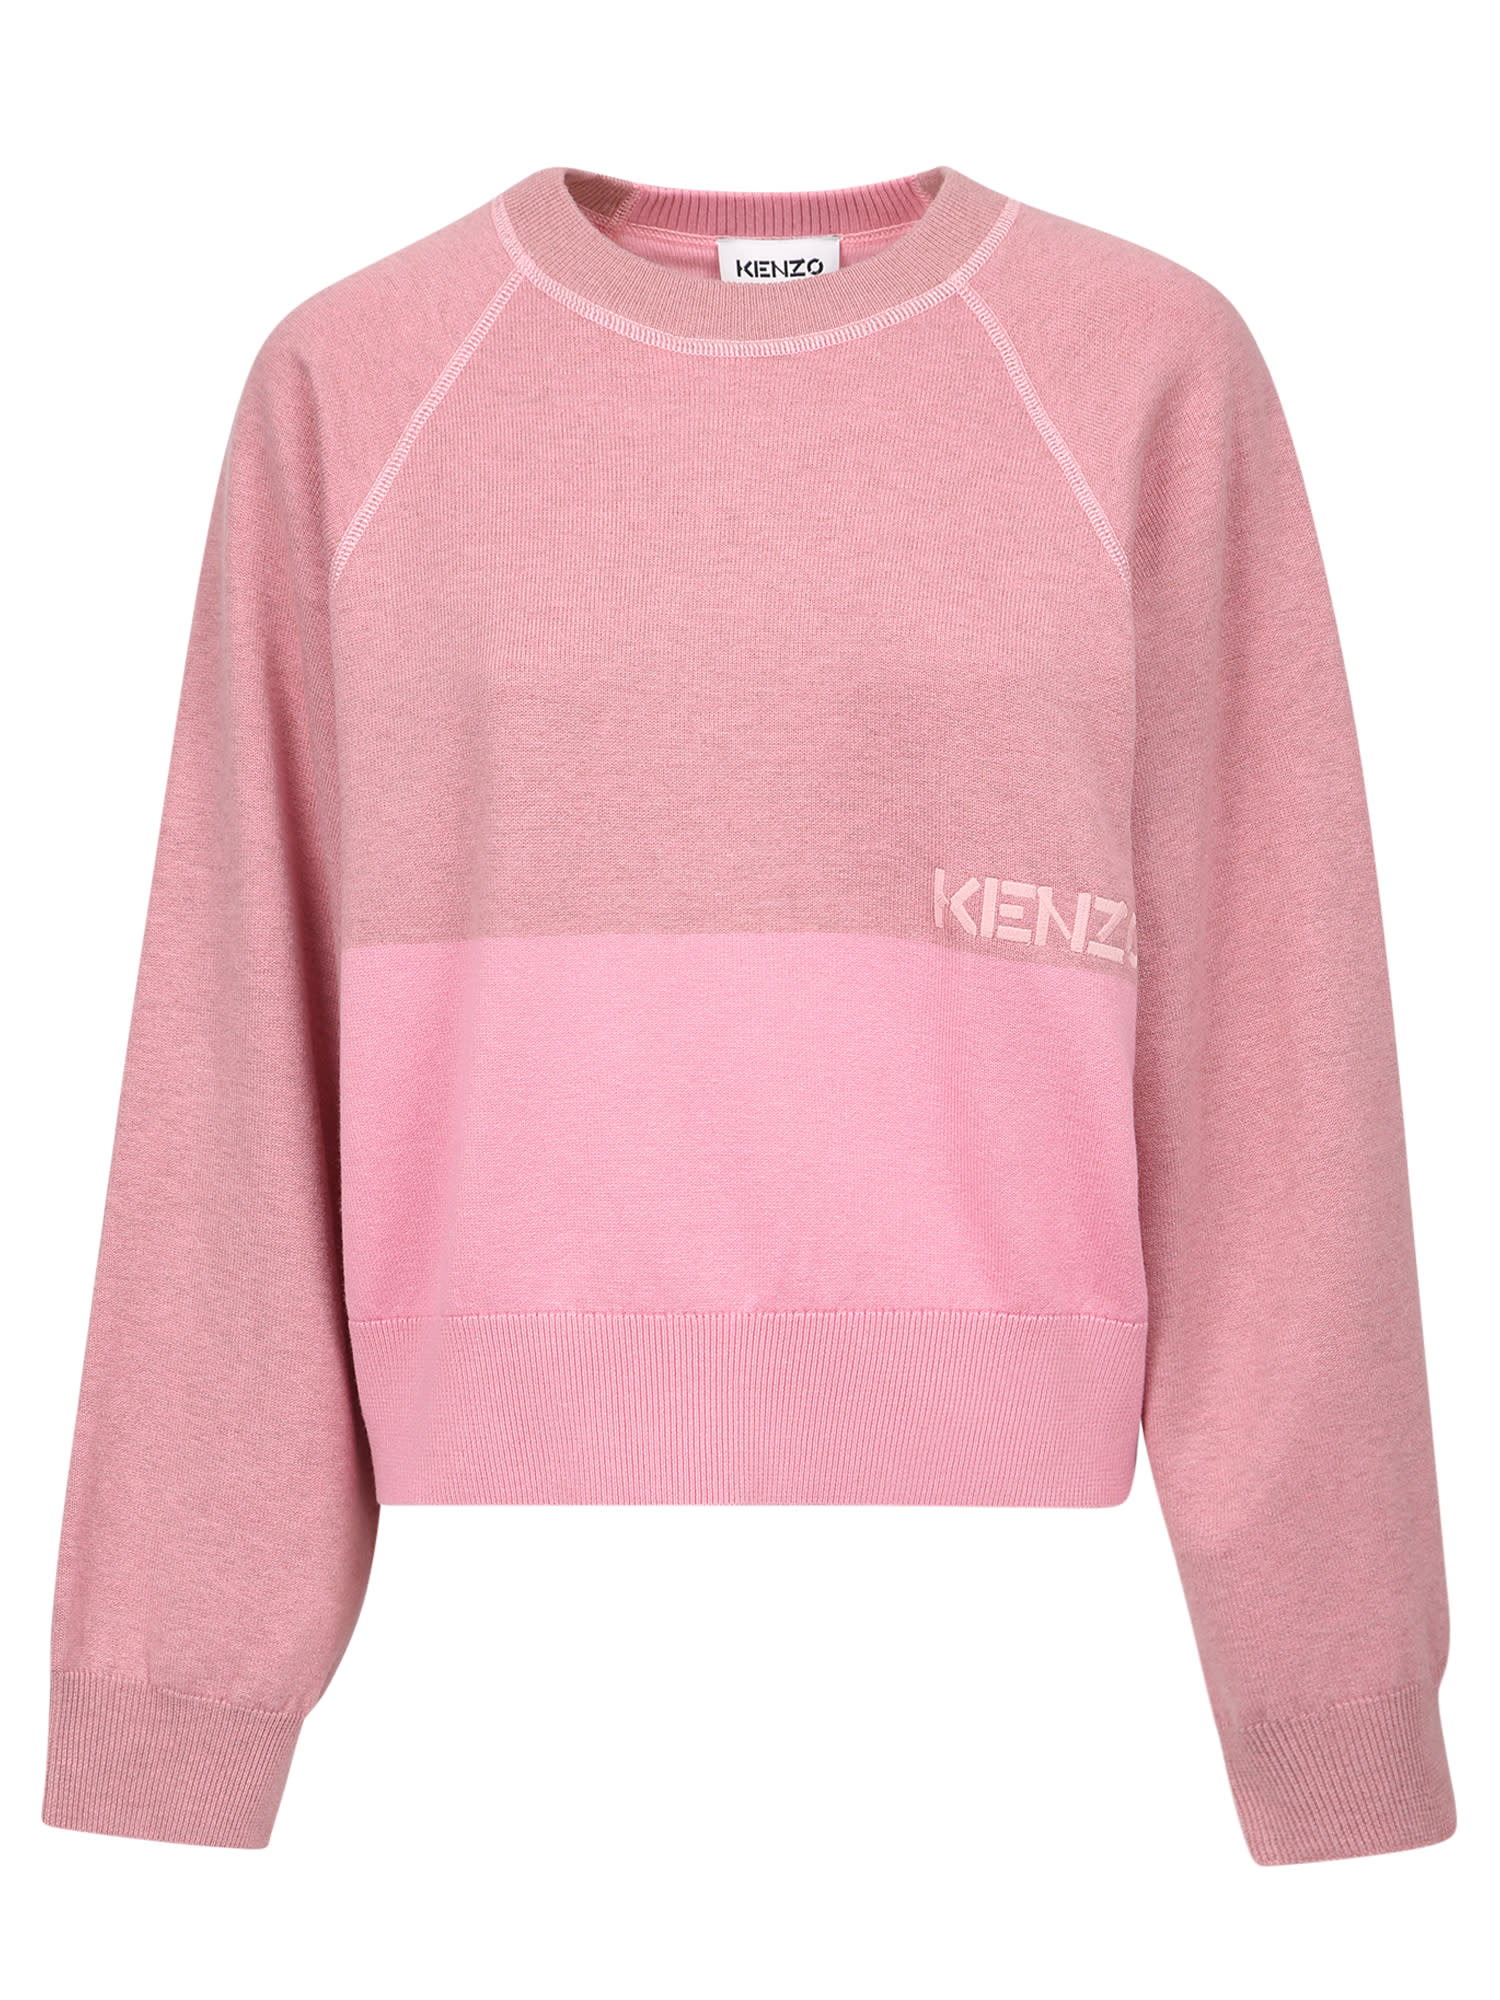 Kenzo Logo Embroidered Cropped Jumper